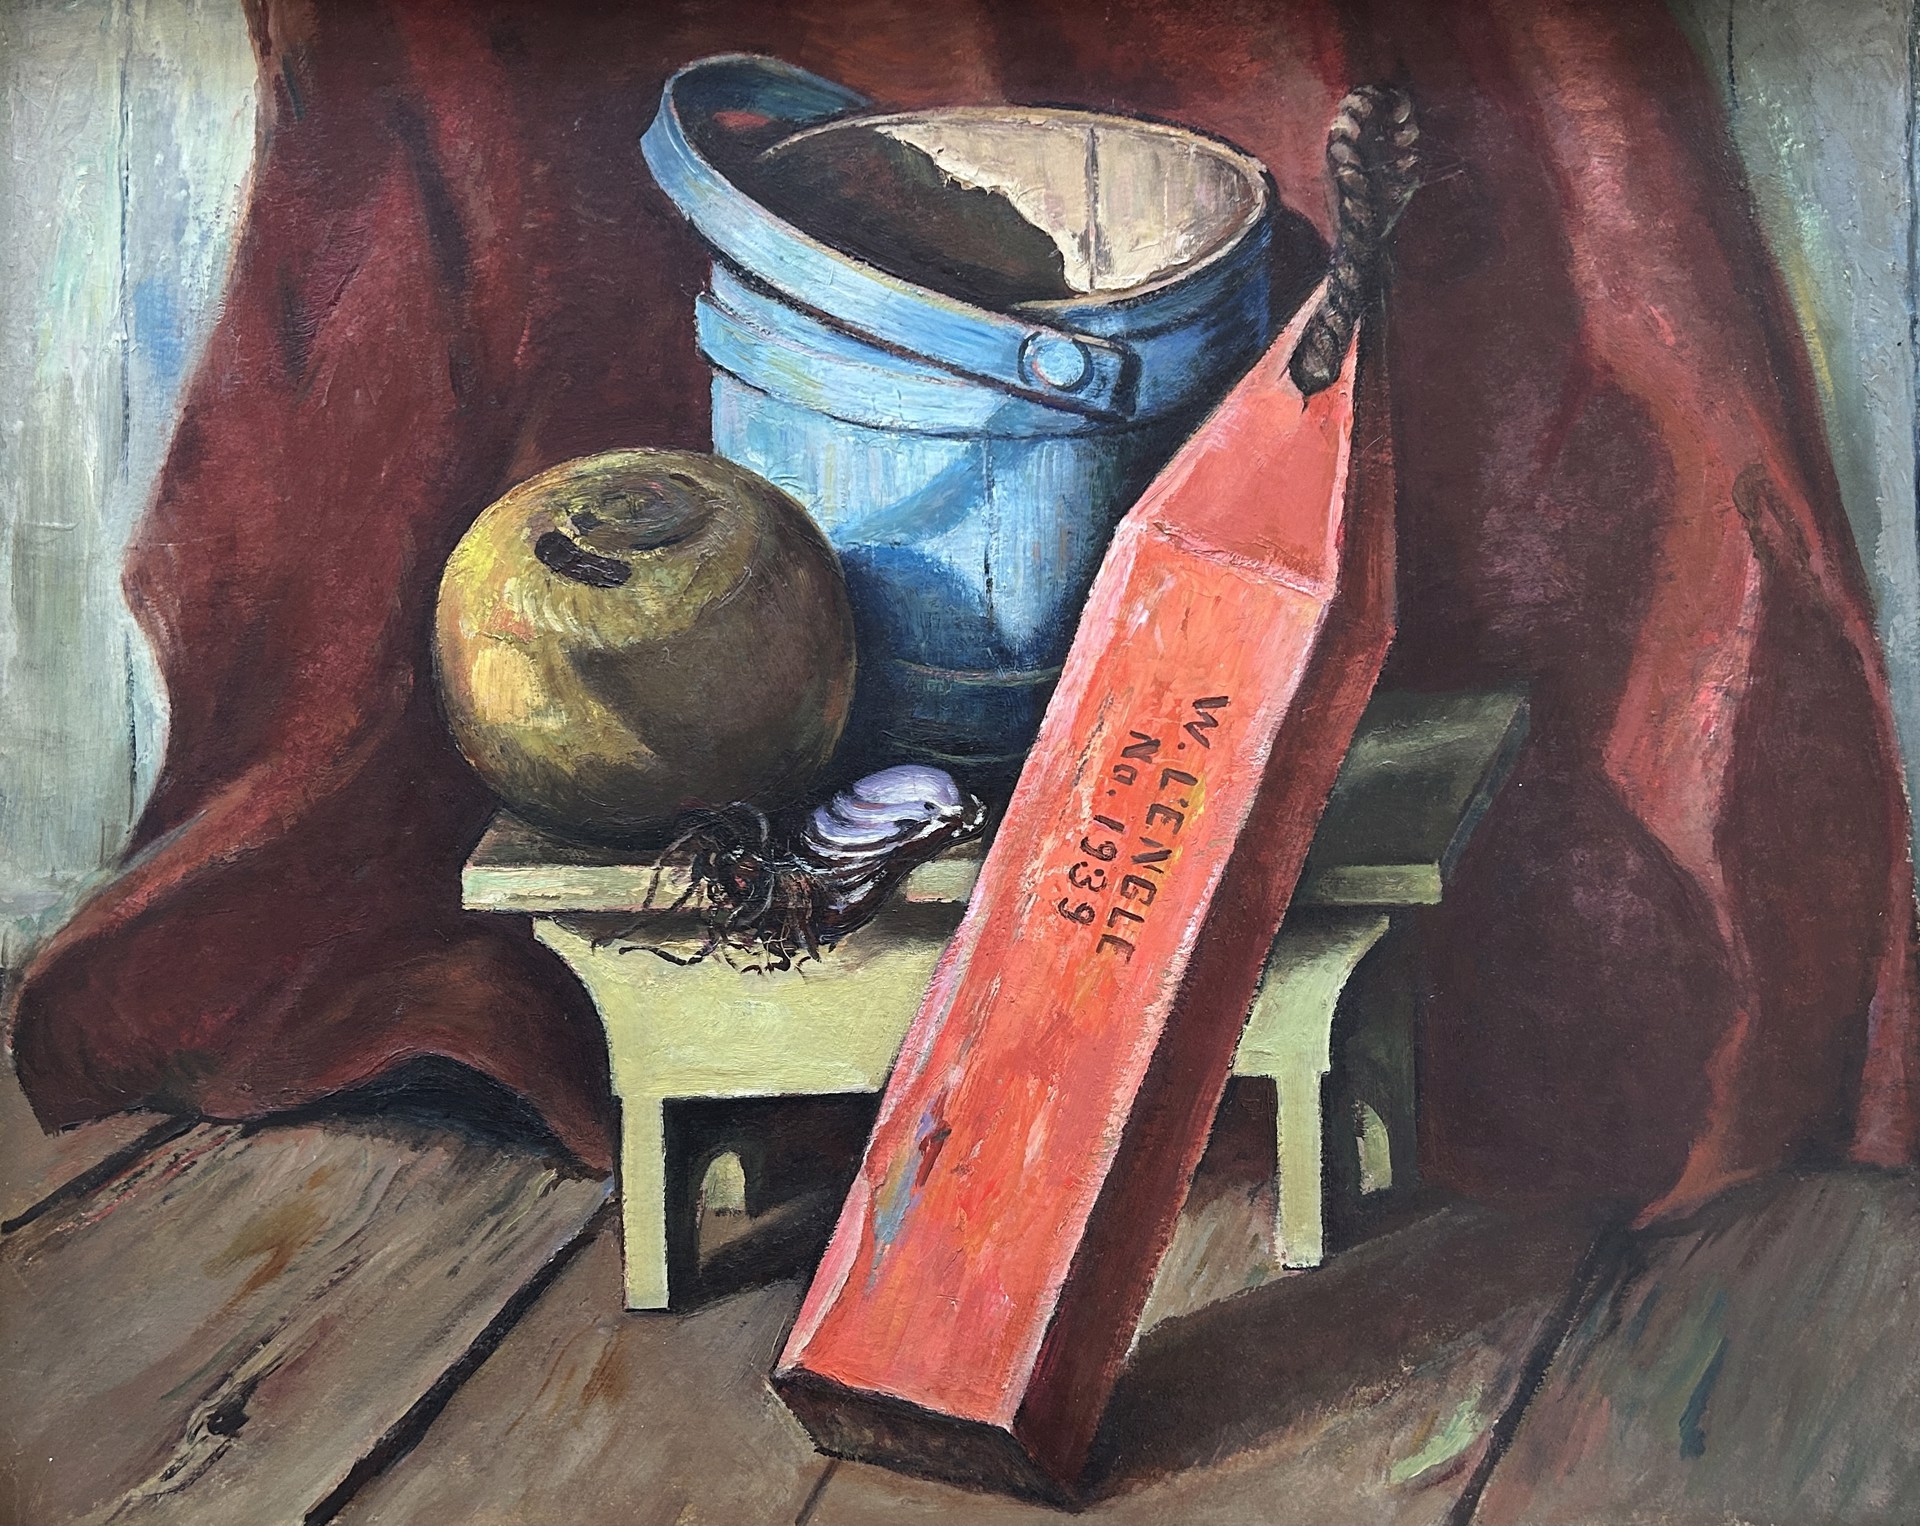 Painting the Hull (reverse Still Life by William L'Engle) by Lucy L'Engle